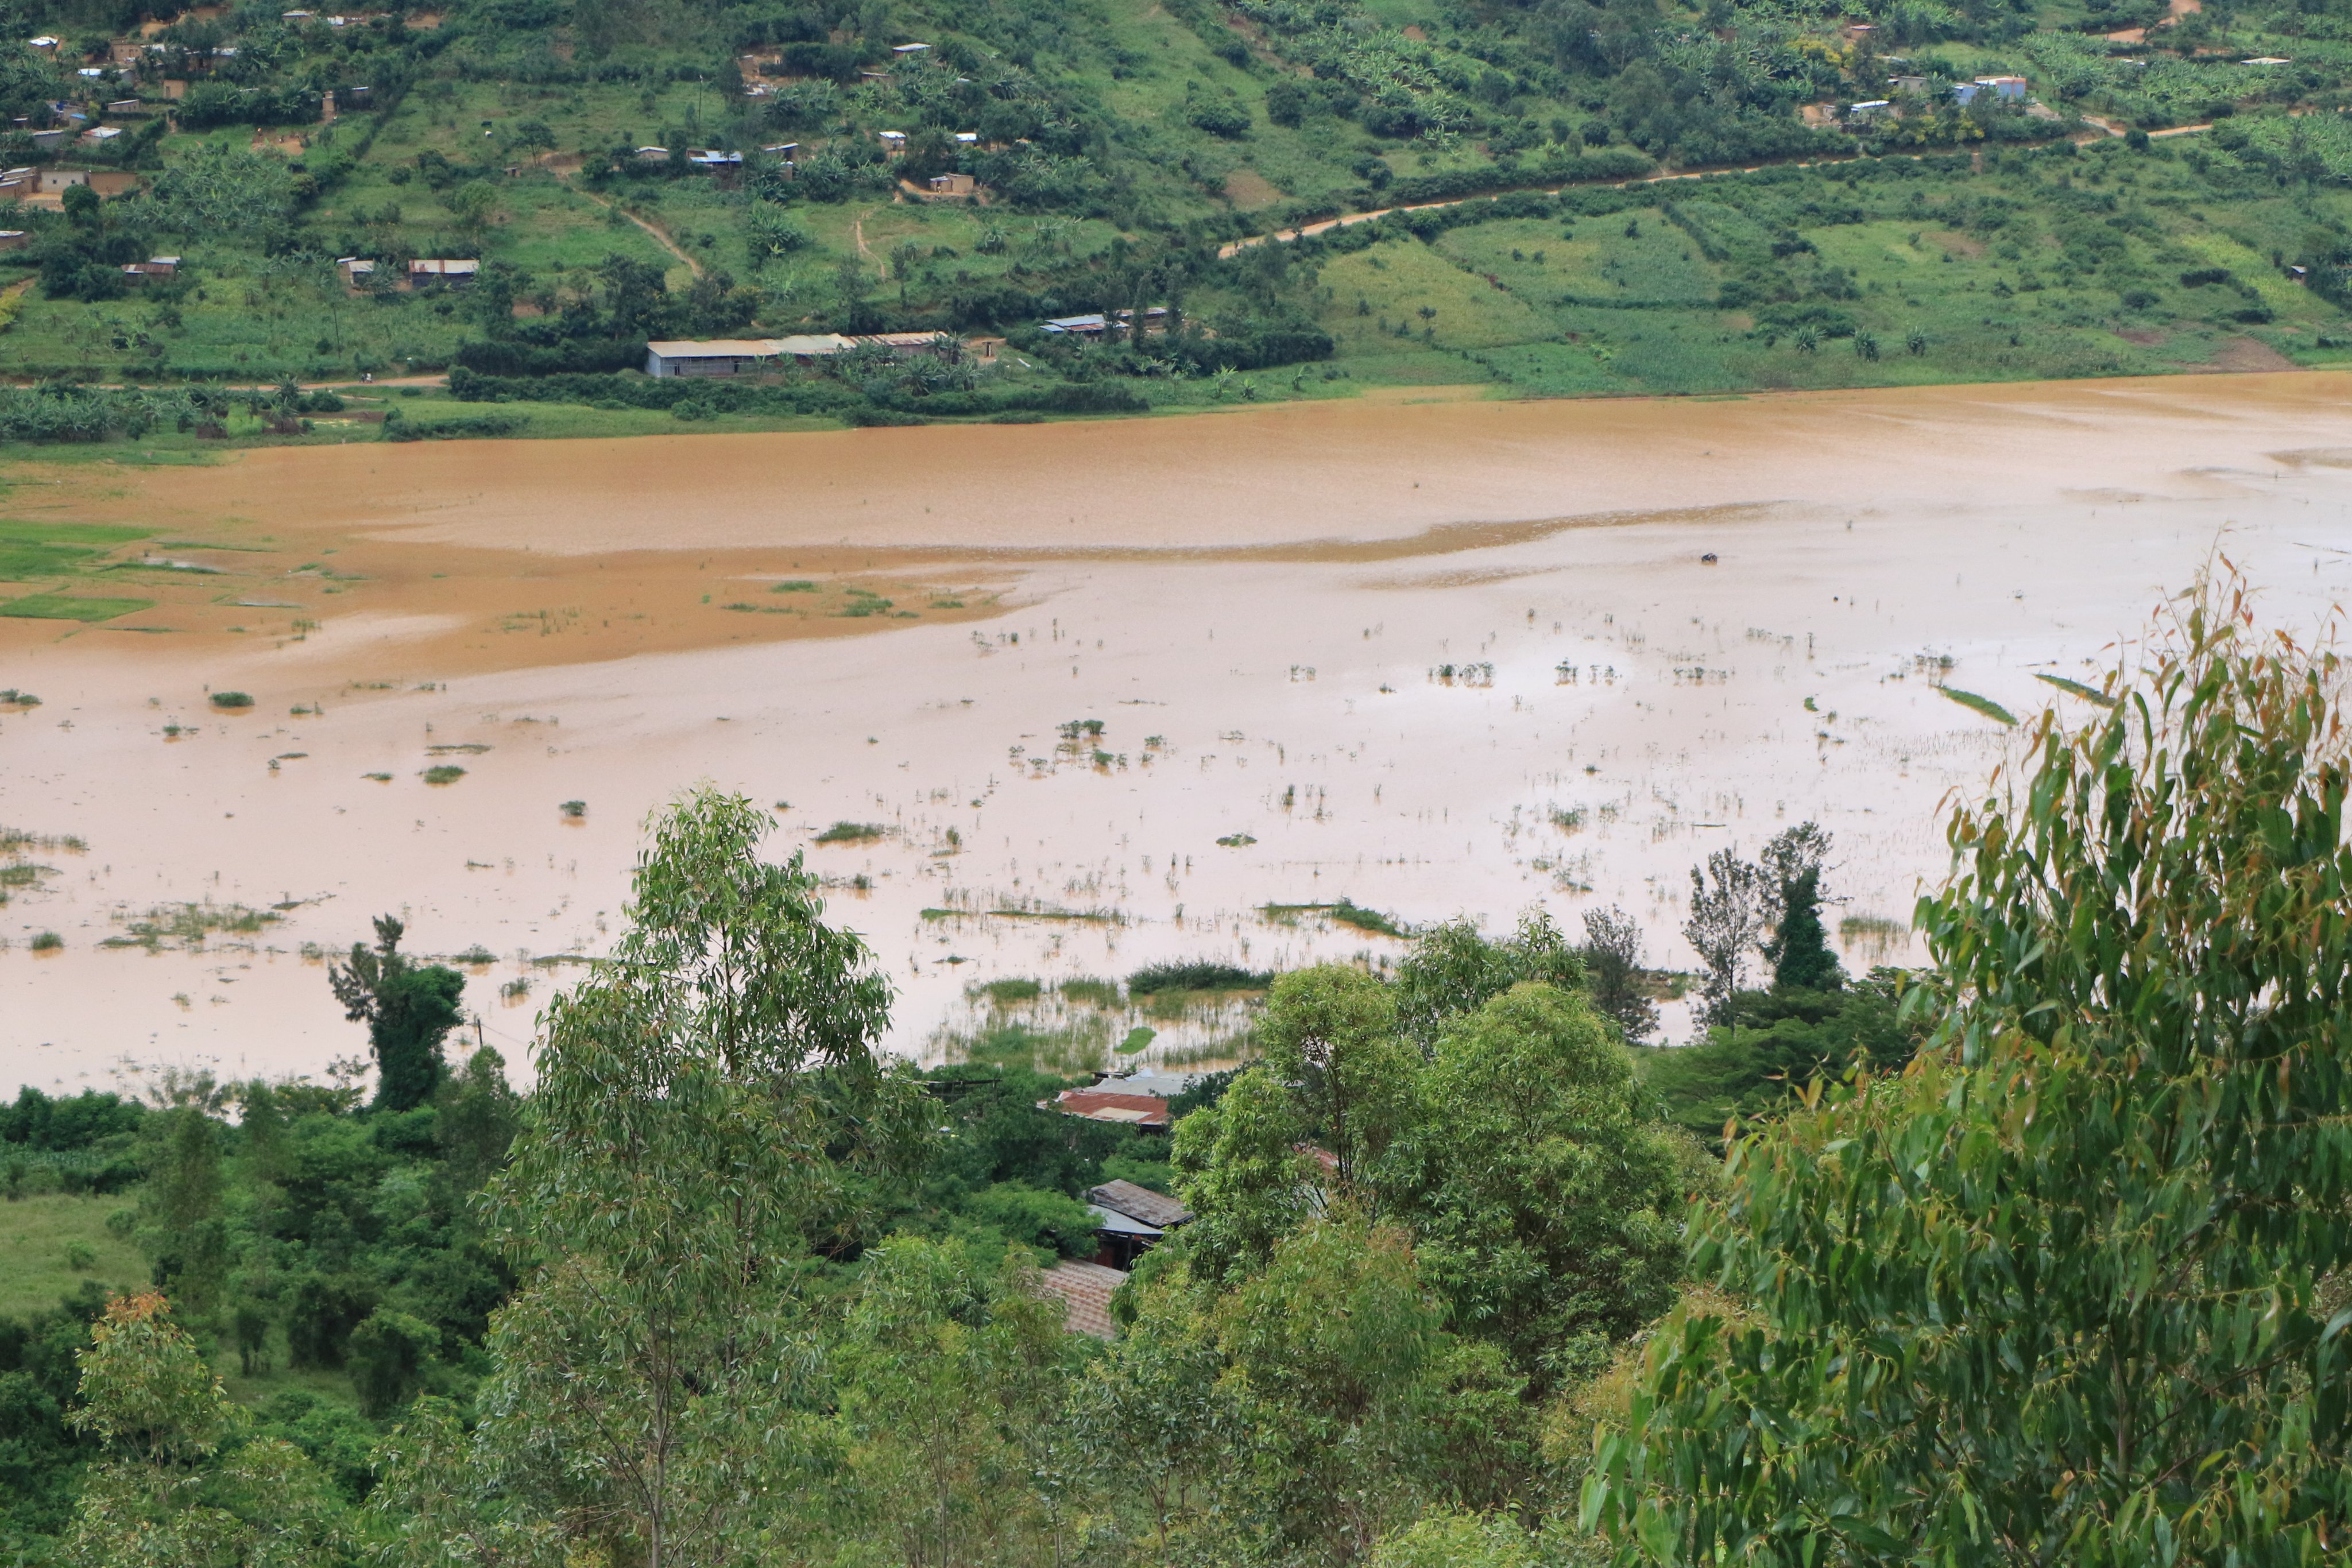 A flooded wetland at Masaka in Kicukiro District after the heavy rain on April 23. Heavy rain resulted in flooding across the City of Kigali and caused significant crop damage to farms around wetlands. Courtesy